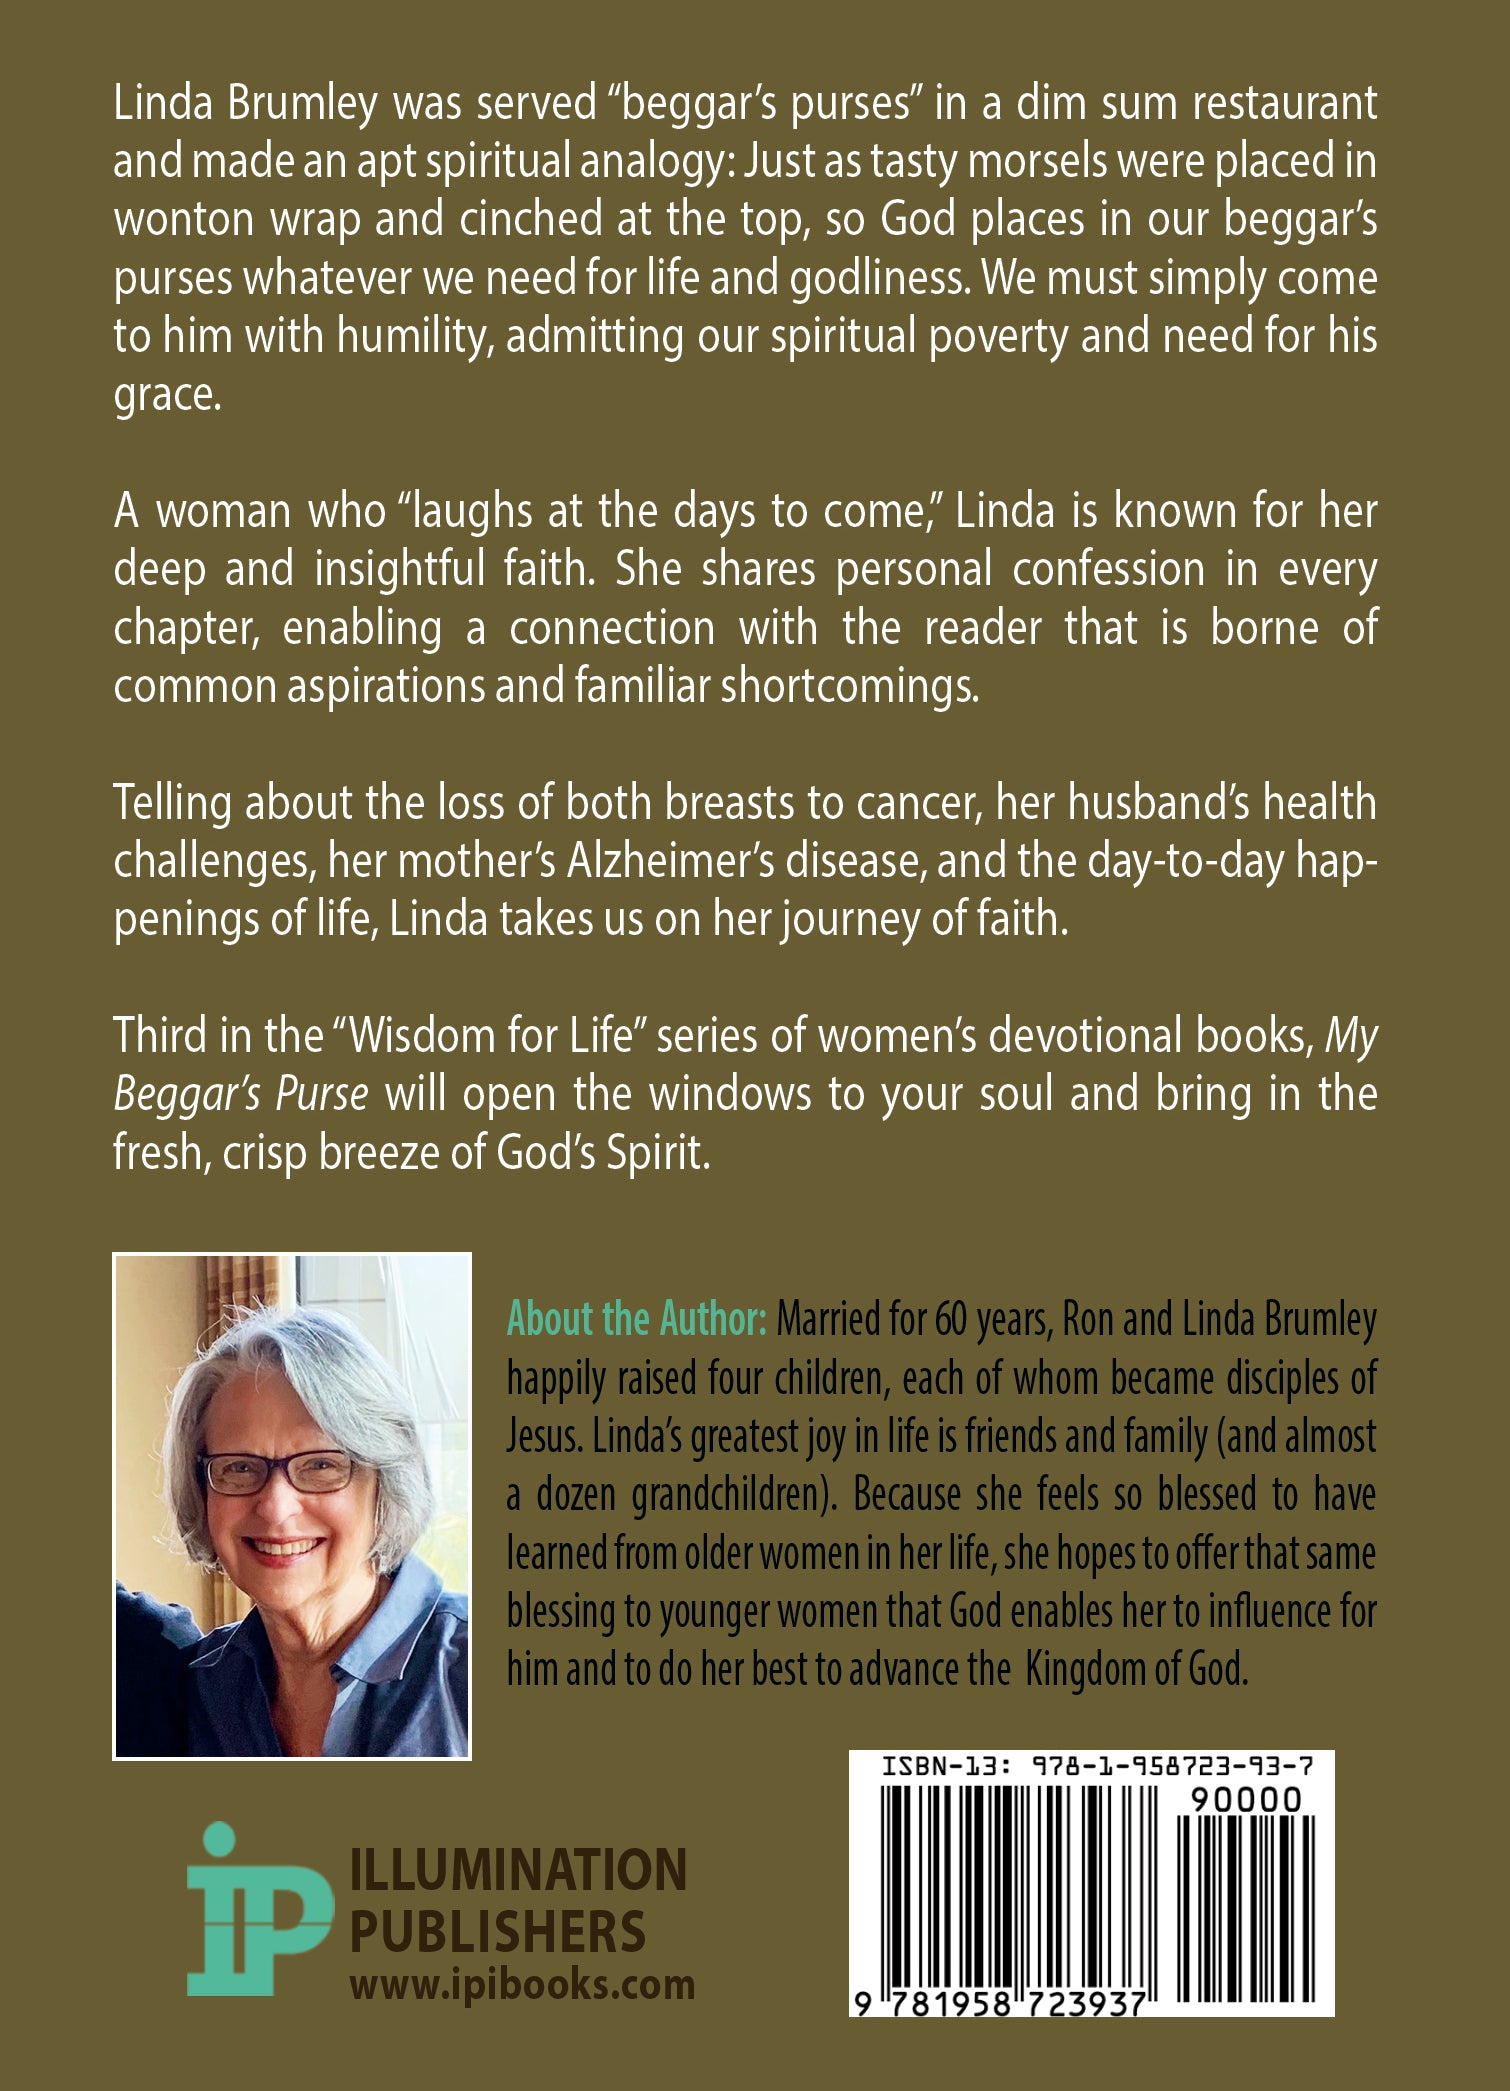 My Beggar's Purse And Other Spiritual Thoughts - Illumination Publishers